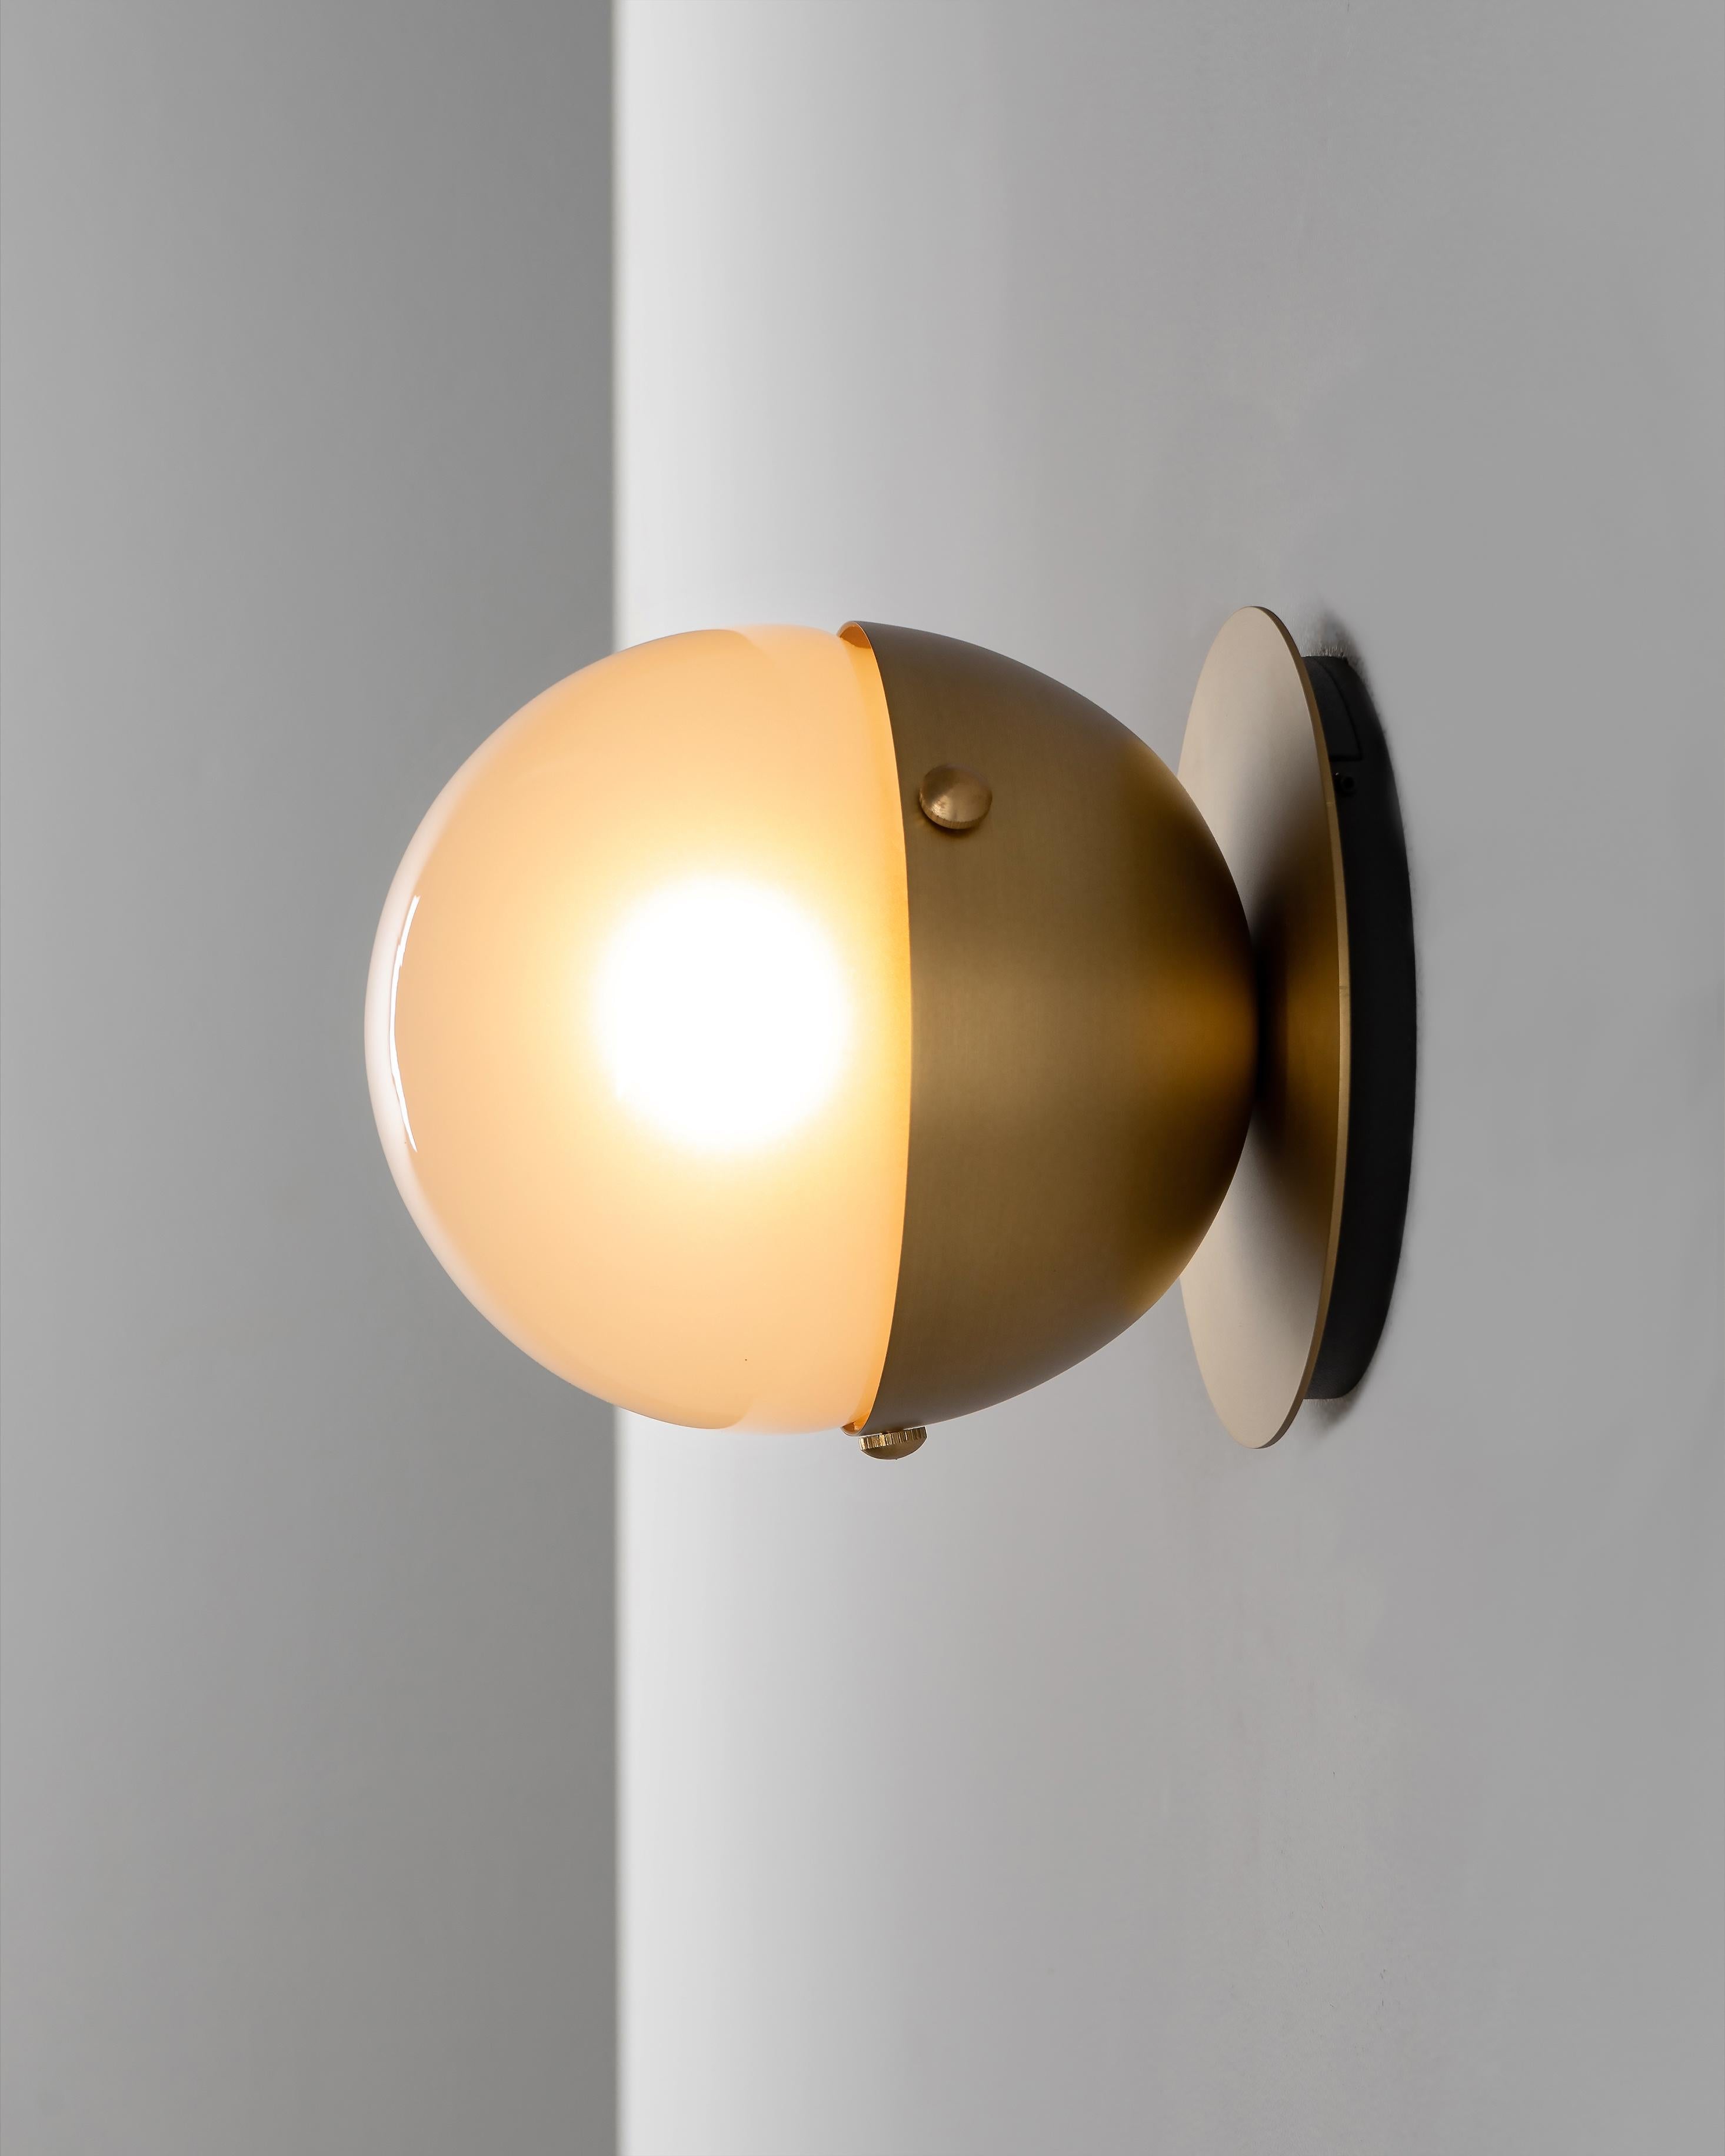 Molecule 1 Wall Sconce by Schwung
Dimensions: D 12.5 x H 14 cm
Materials: Brass, Glass, PN finish
Also Available: Black Gunmetal

Light Source

LED Bulb (included): 1 x 5 W
Max Wattage: 1 x 10 W
Total Lumens : 450-500 lm
Color Temperature: